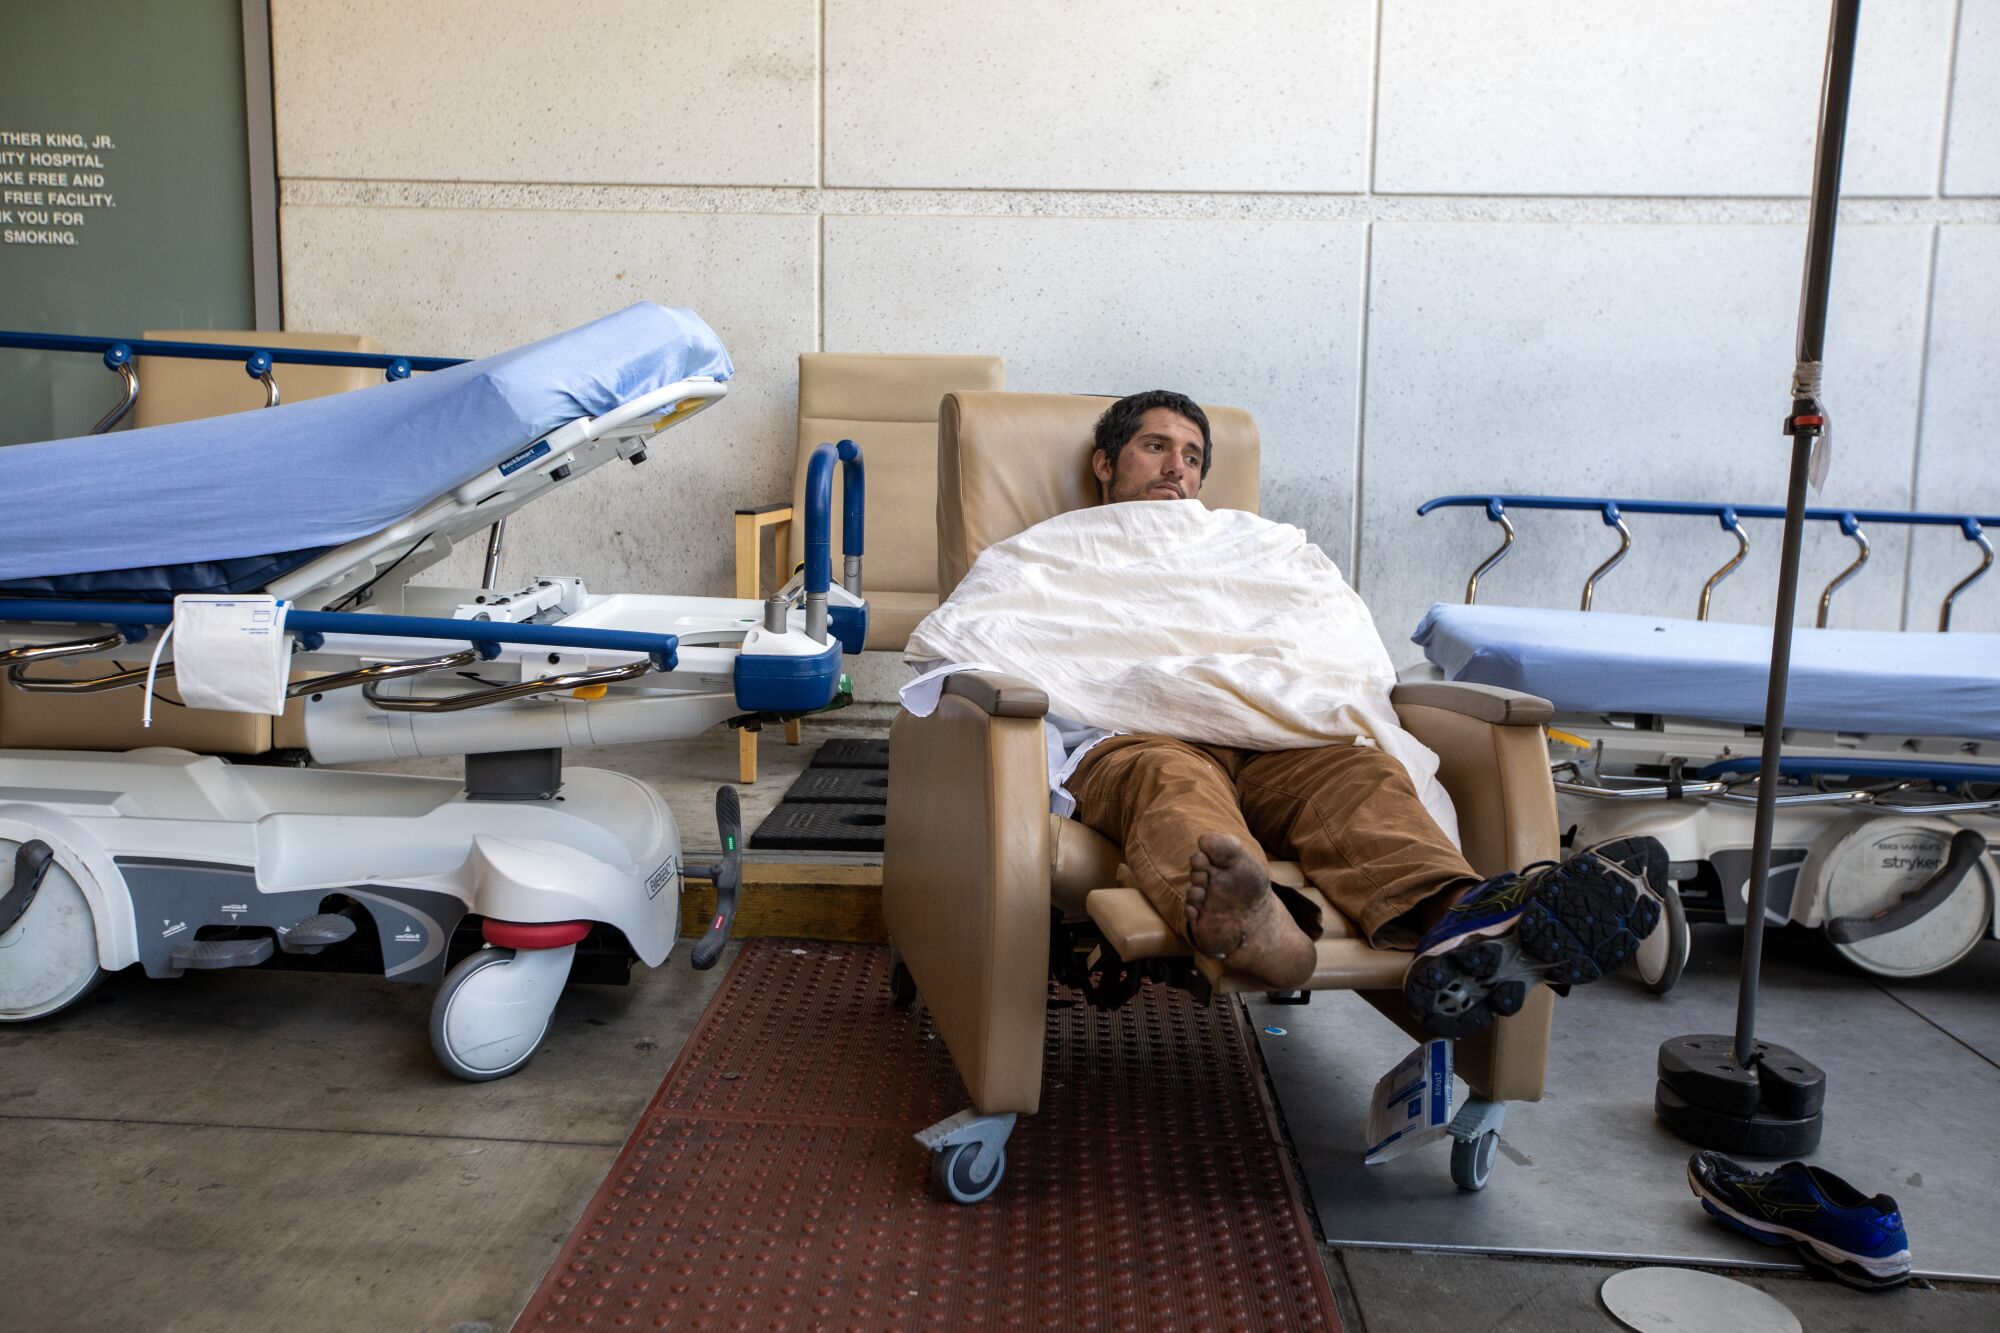 A man with one shoe seated under a blanket between empty hospital beds